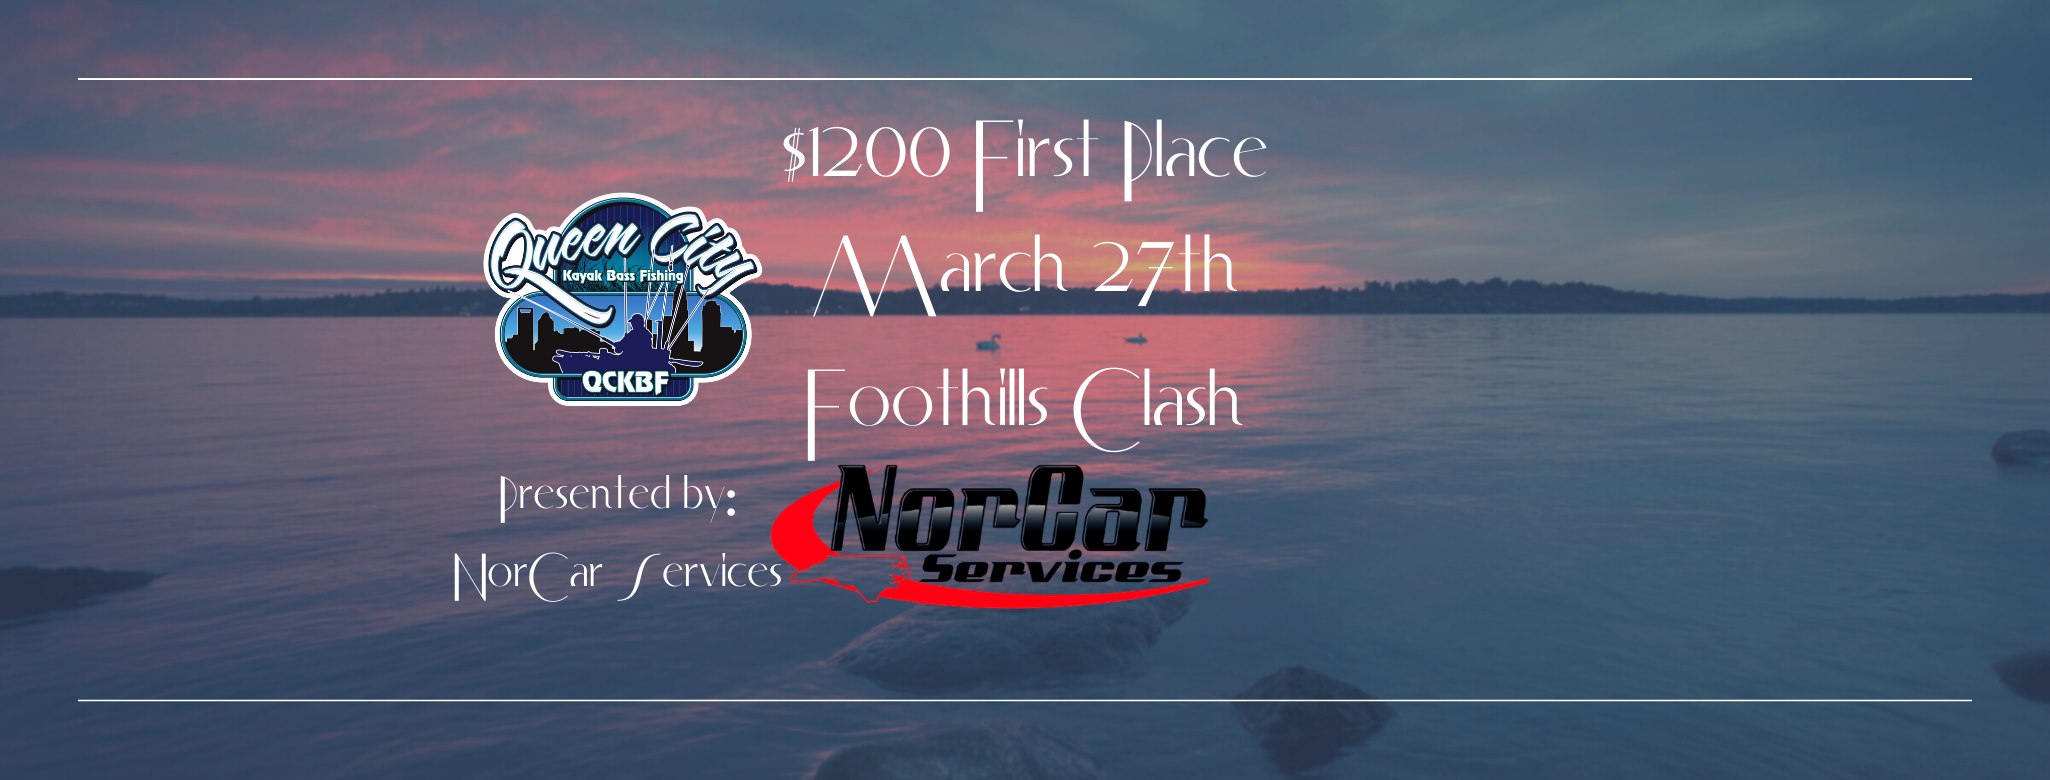 Event 4 Foothill Clash presented by NorCar